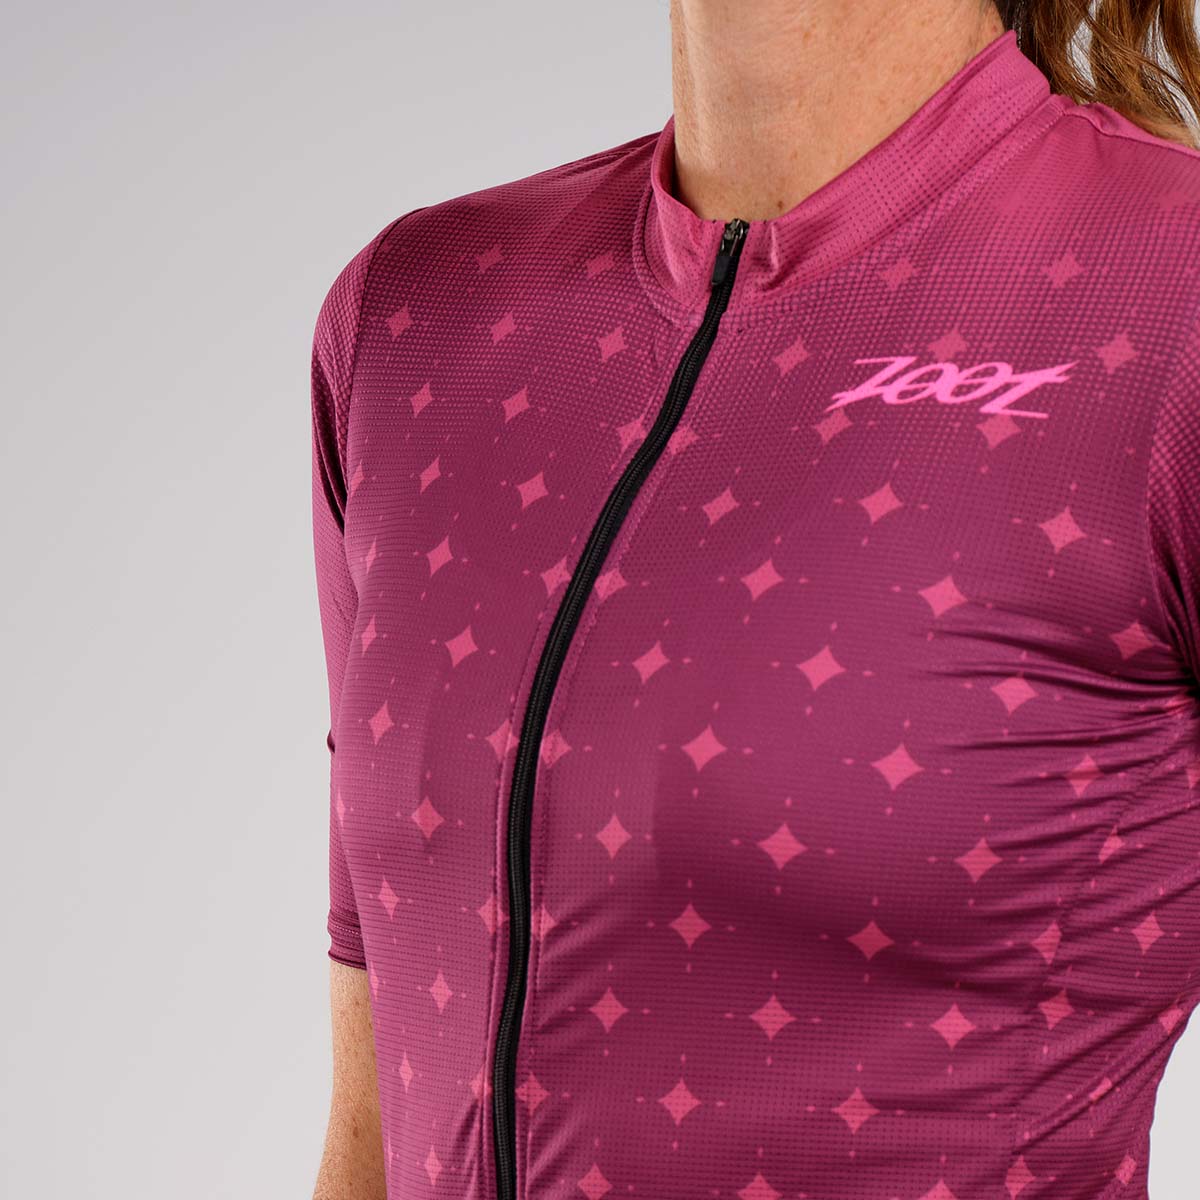 Zoot Sports CYCLE JERSEYS Women's Recon Cycle Jersey - Plum